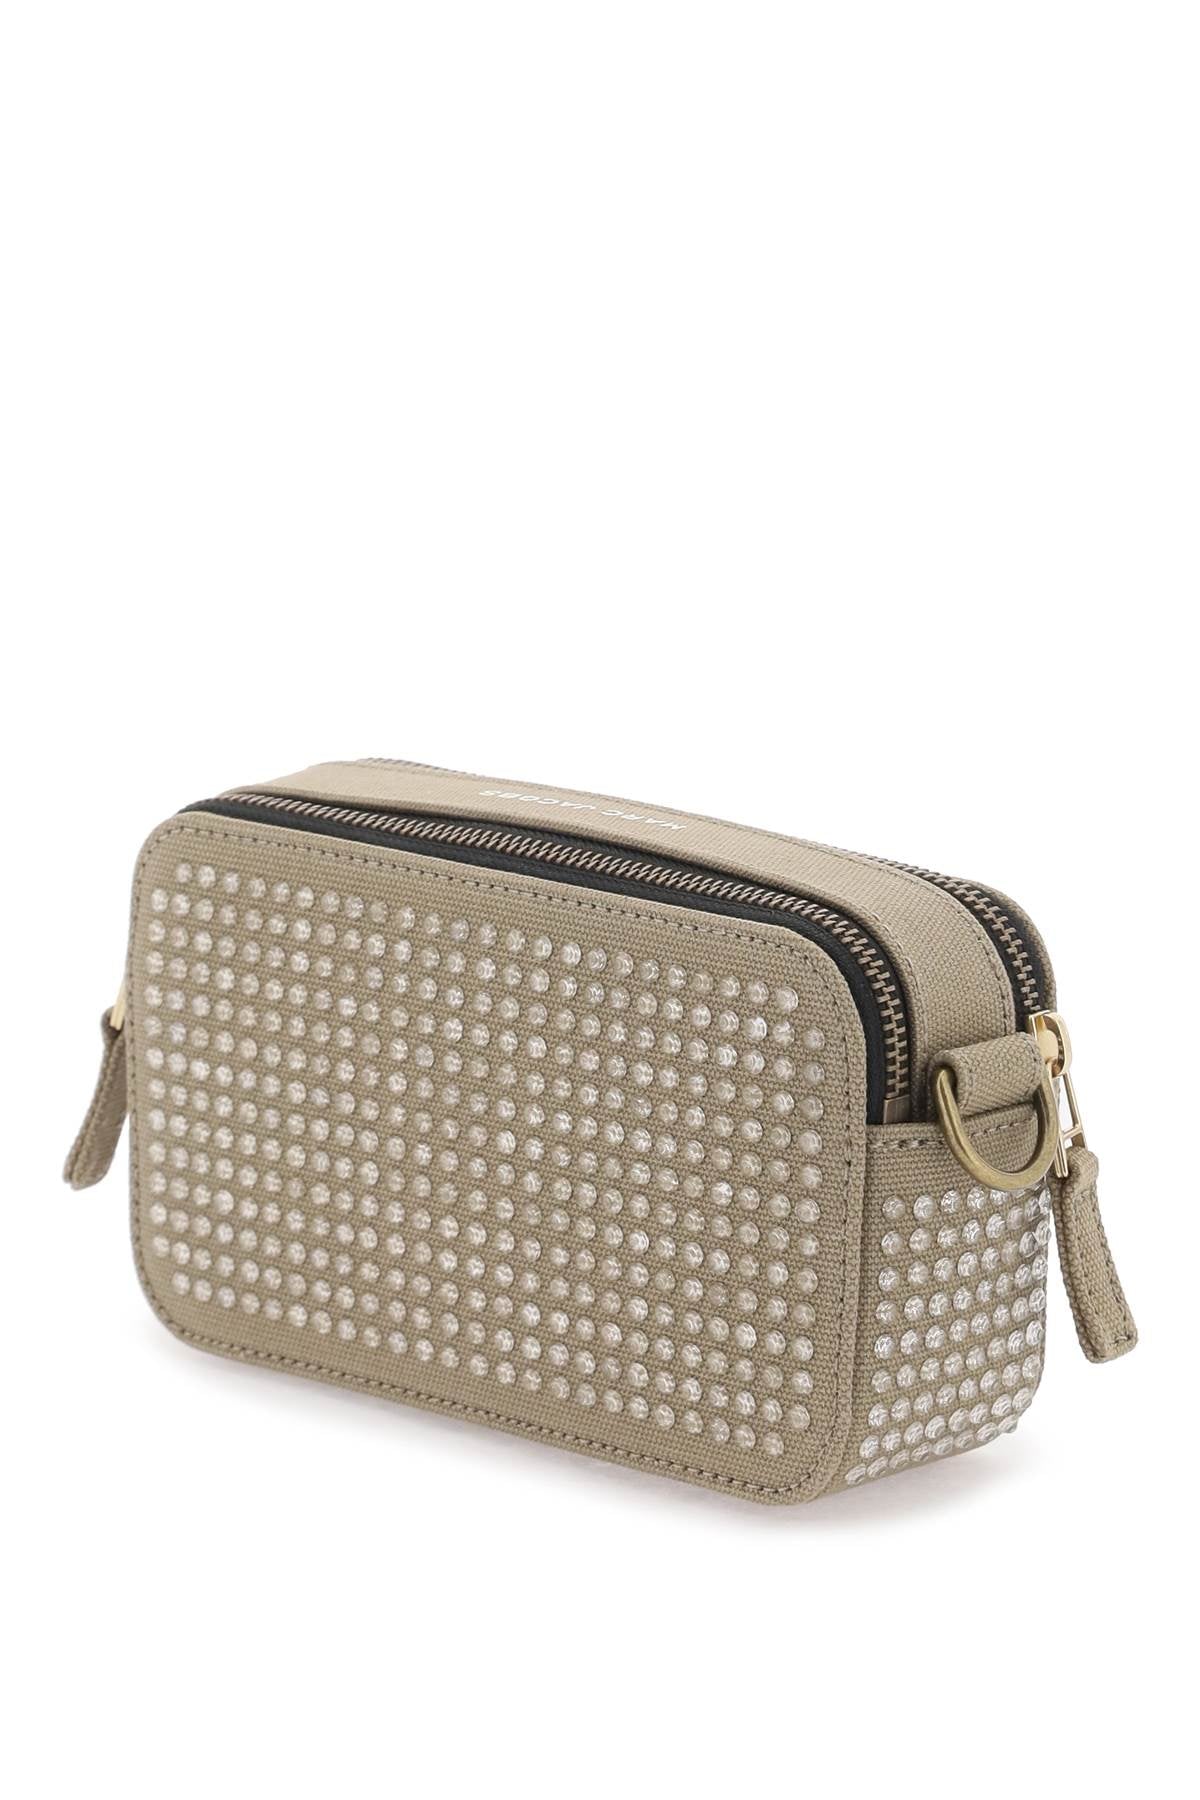 Marc jacobs the crystal canvas snapshot-1